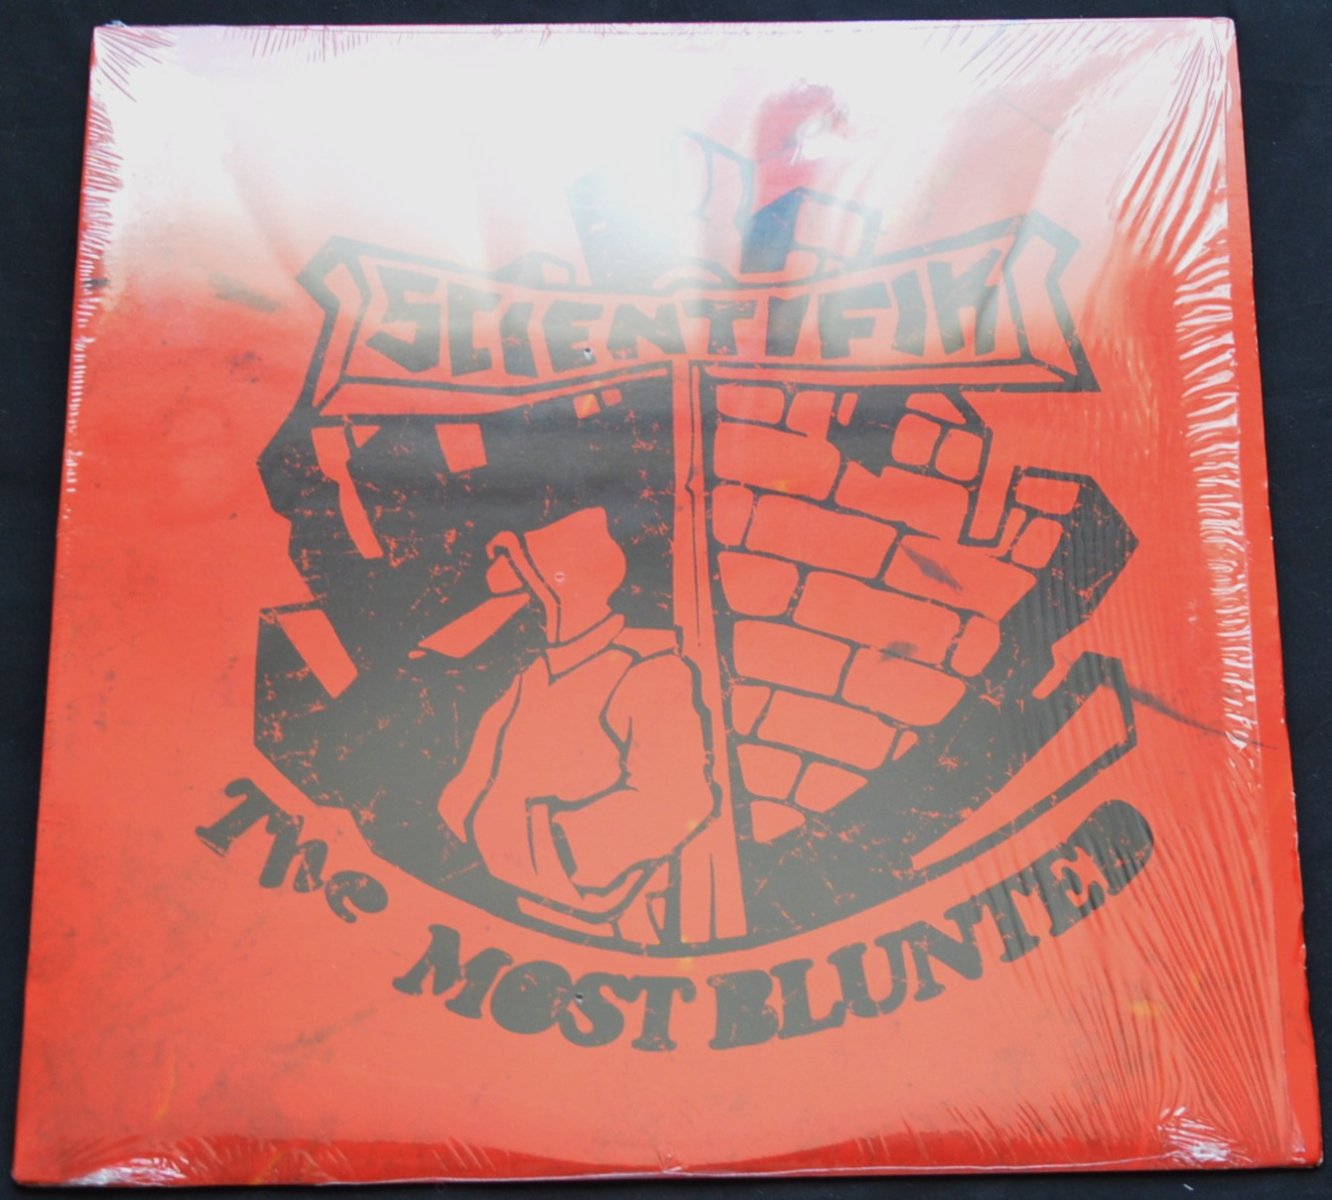 SCIENTIFIK / THE MOST BLUNTED (1LP) - HIP TANK RECORDS